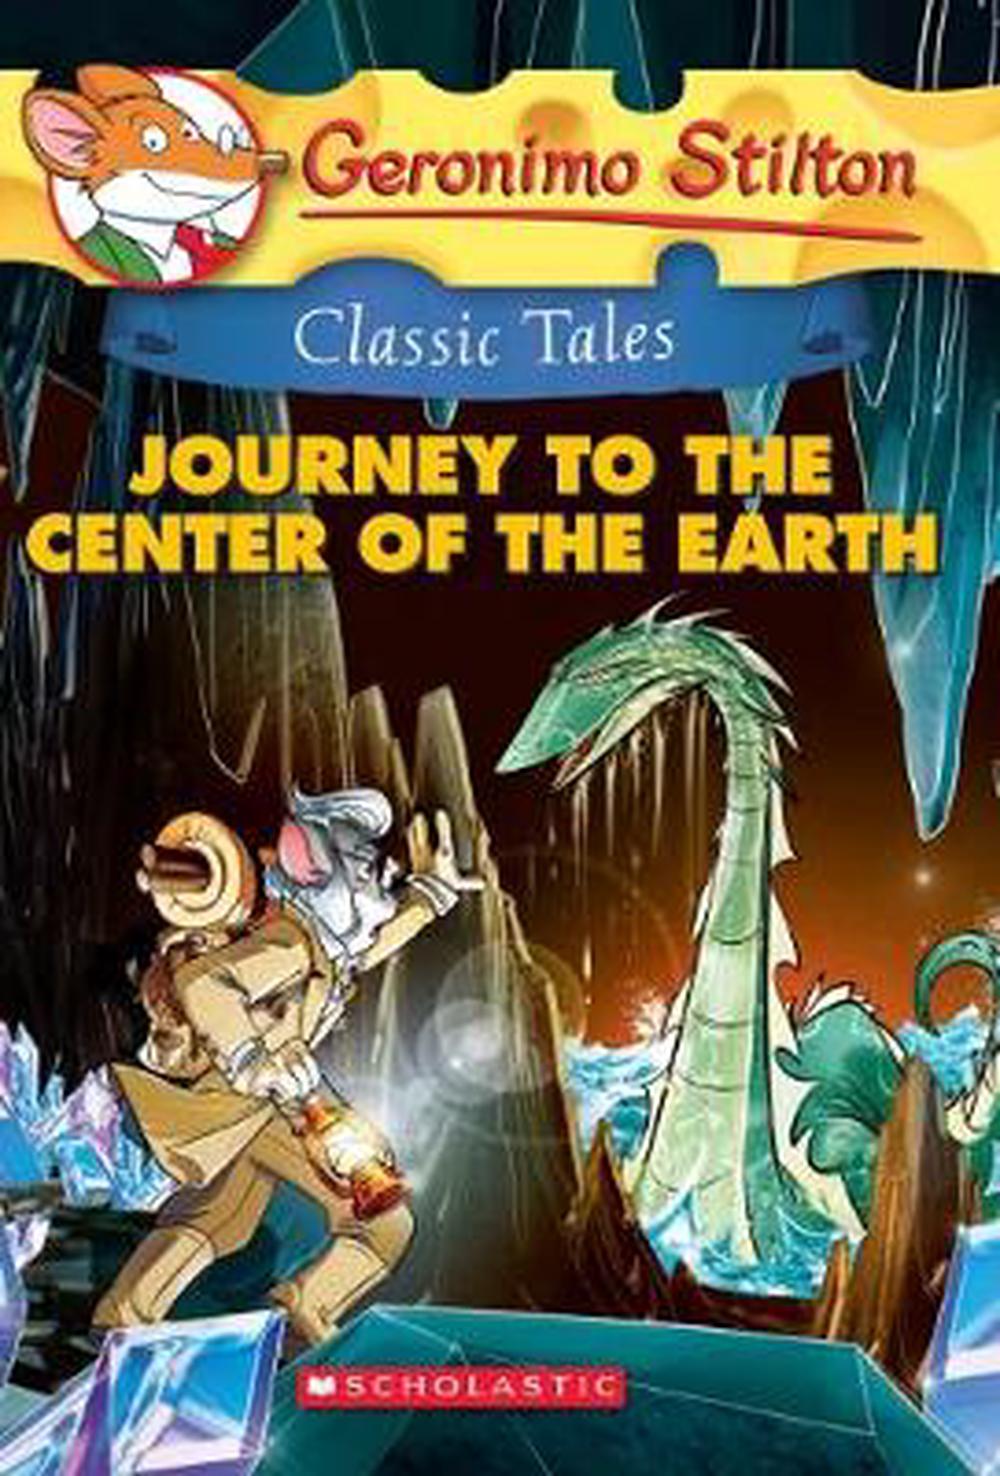 Geronimo Stilton Classic Tales: Journey to the Center of the Earth ...